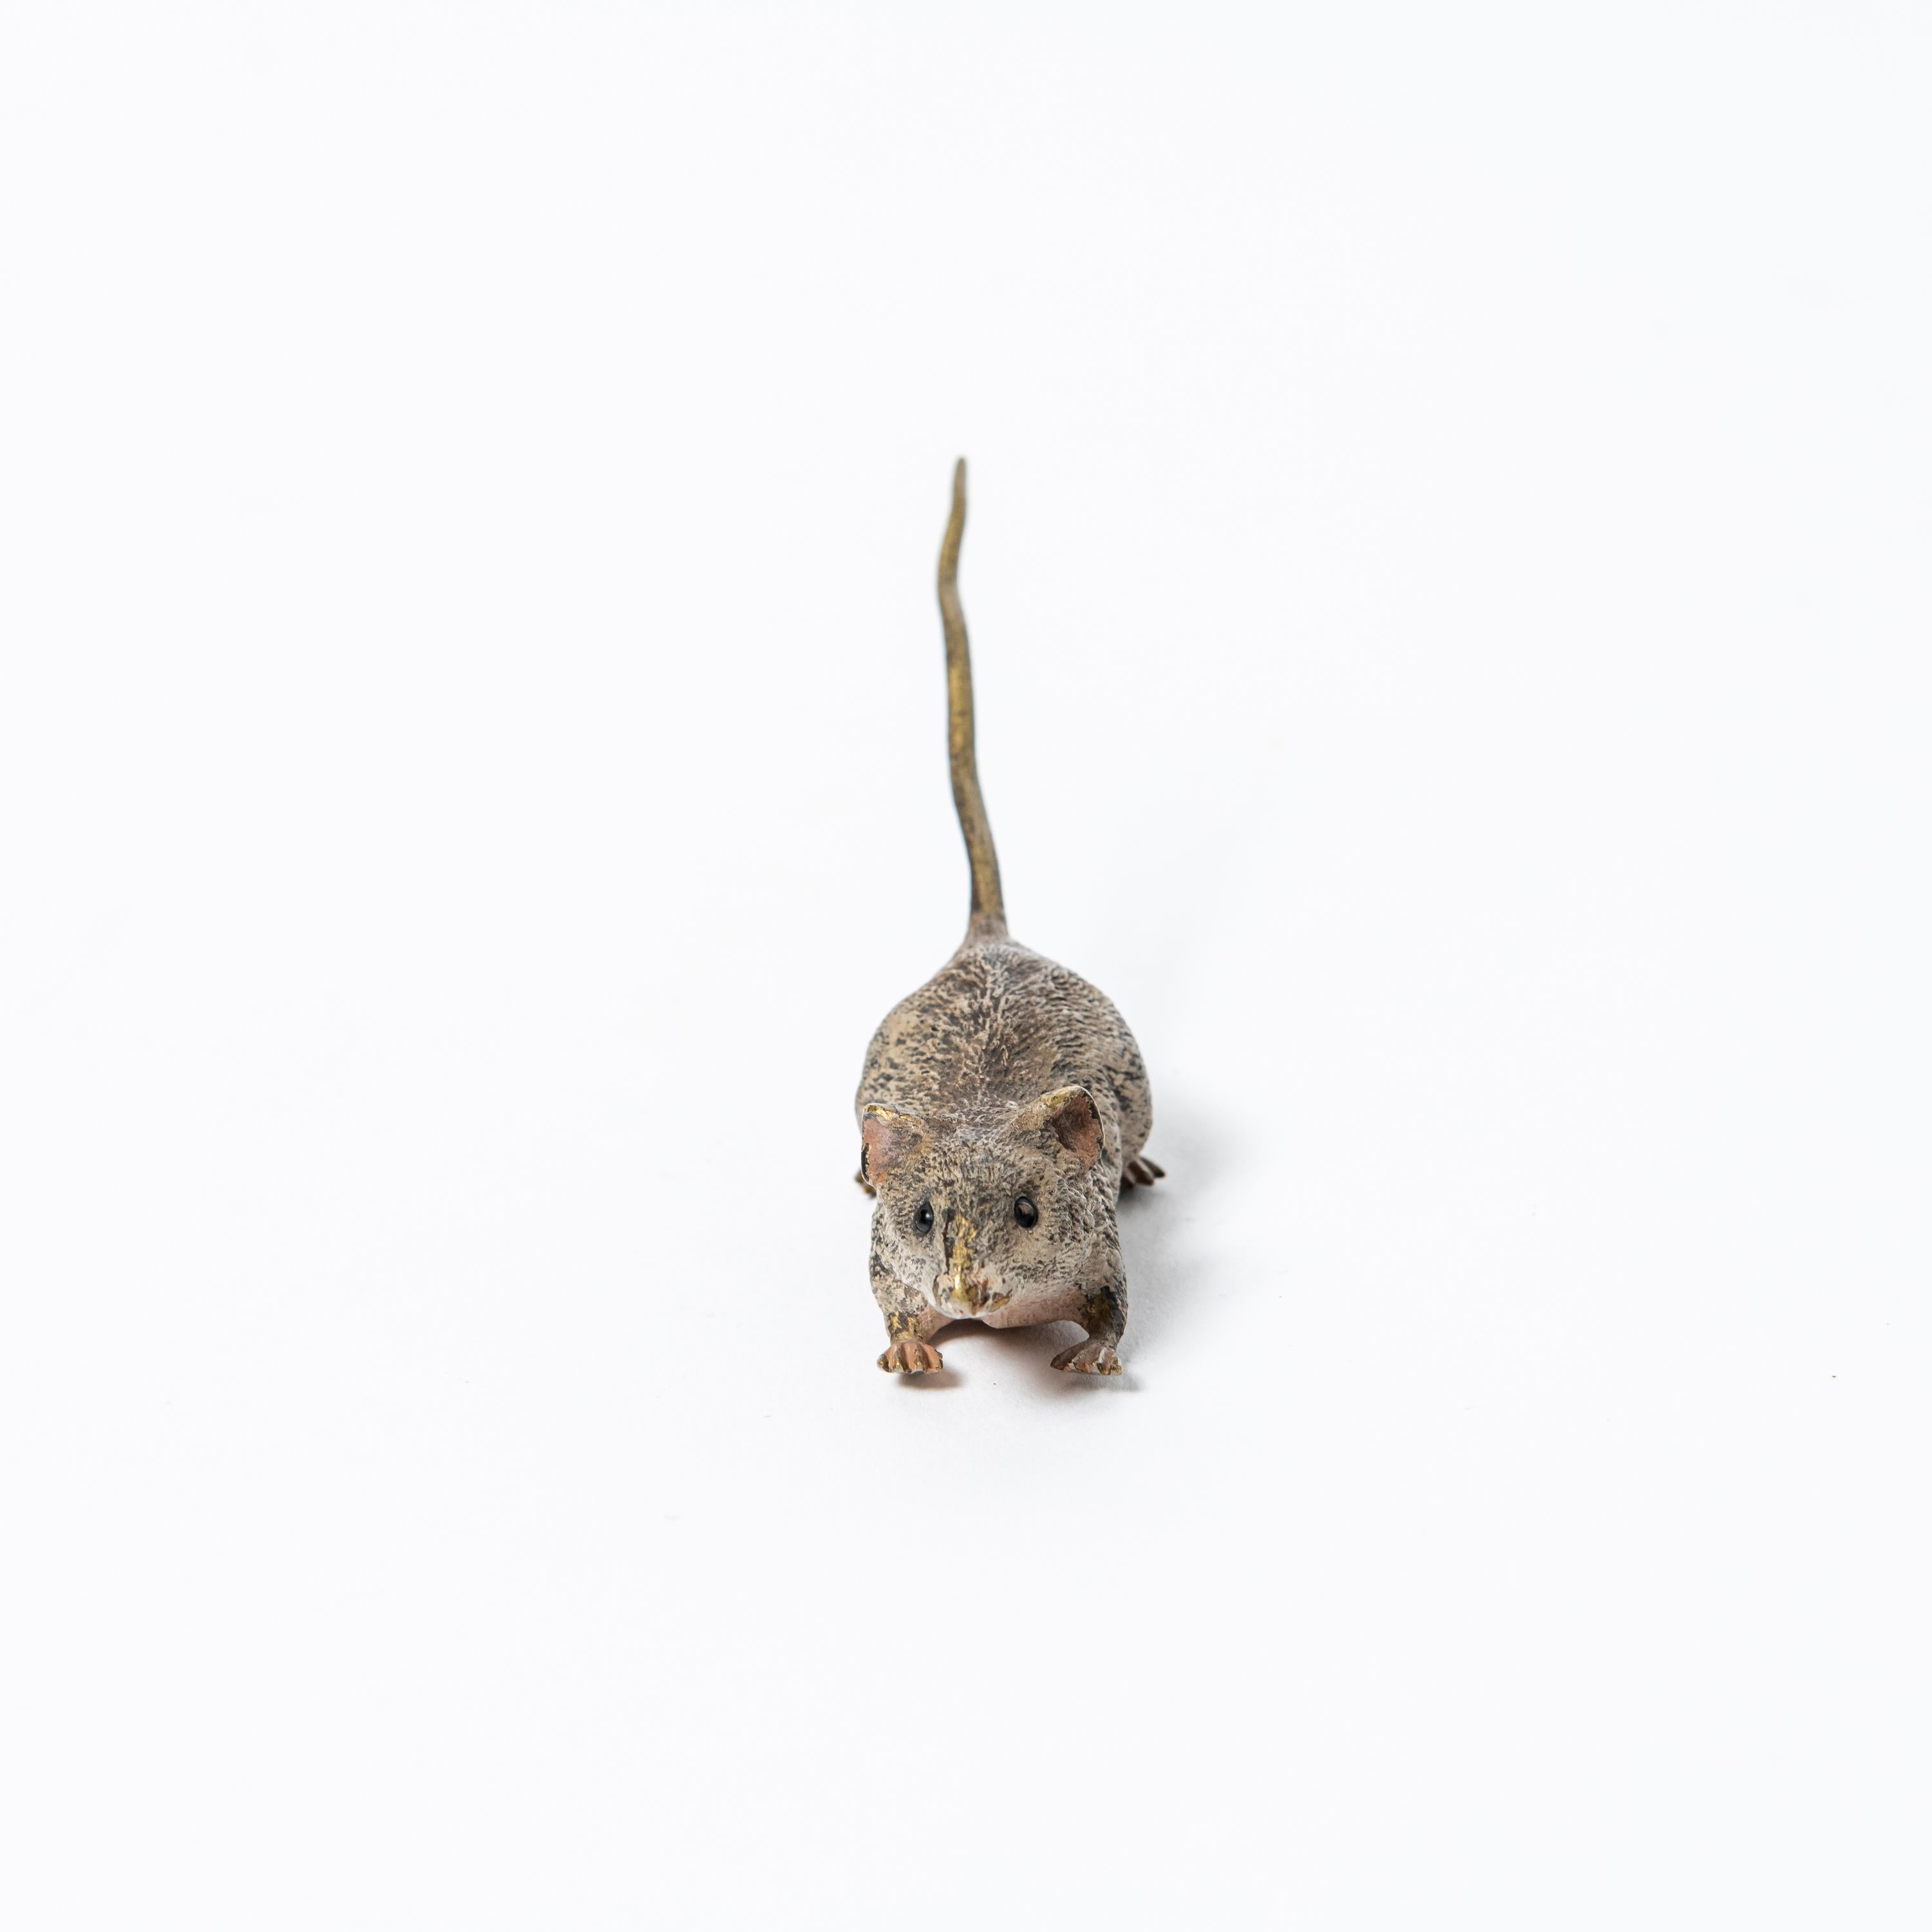 Cold-painted bronze mouse sculpture attributed to Franz Bergmann. Austria, early 20th century.